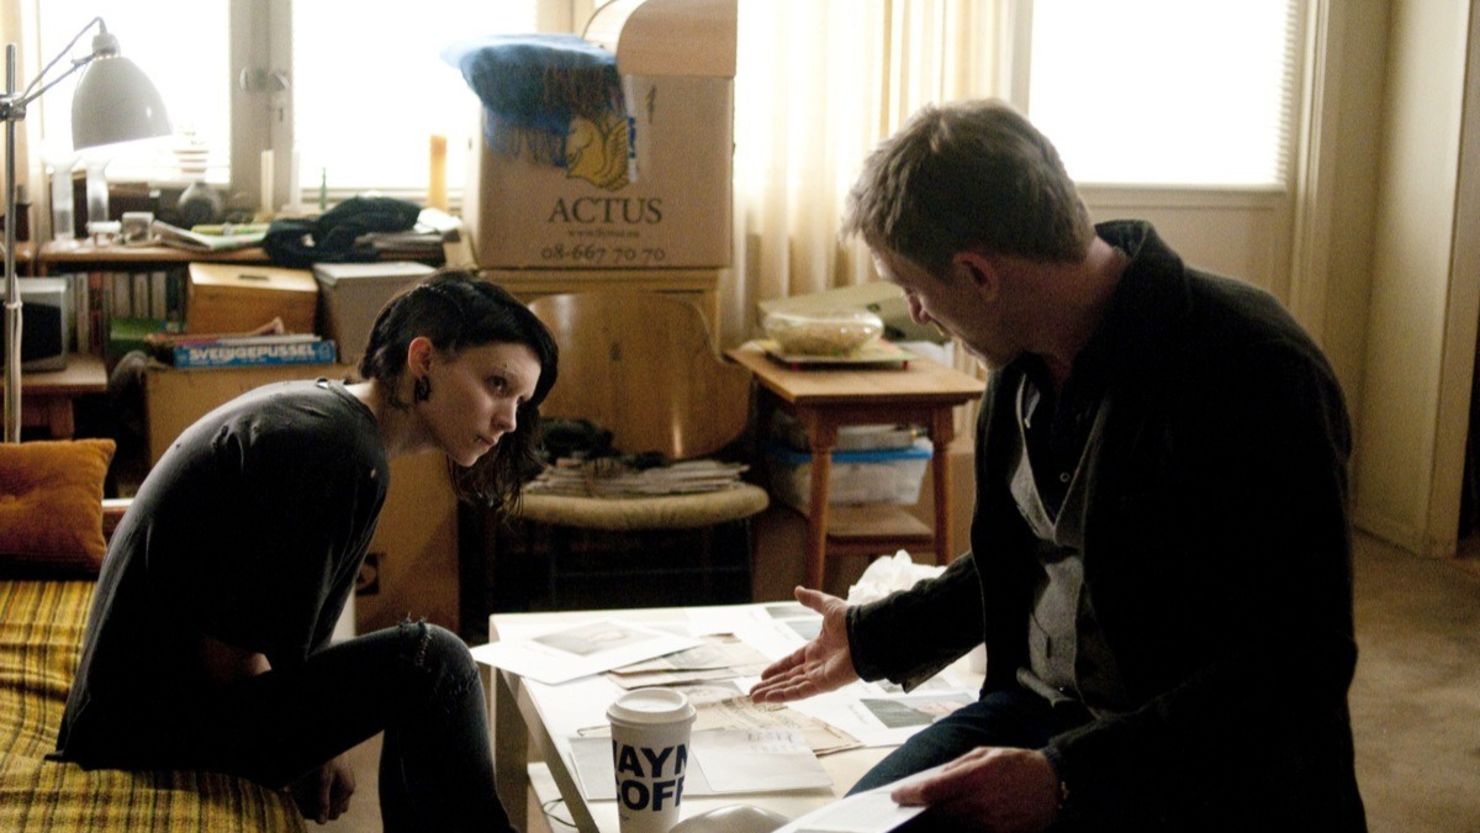 Rooney Mara and Daniel Craig star in "The Girl With the Dragon Tattoo."